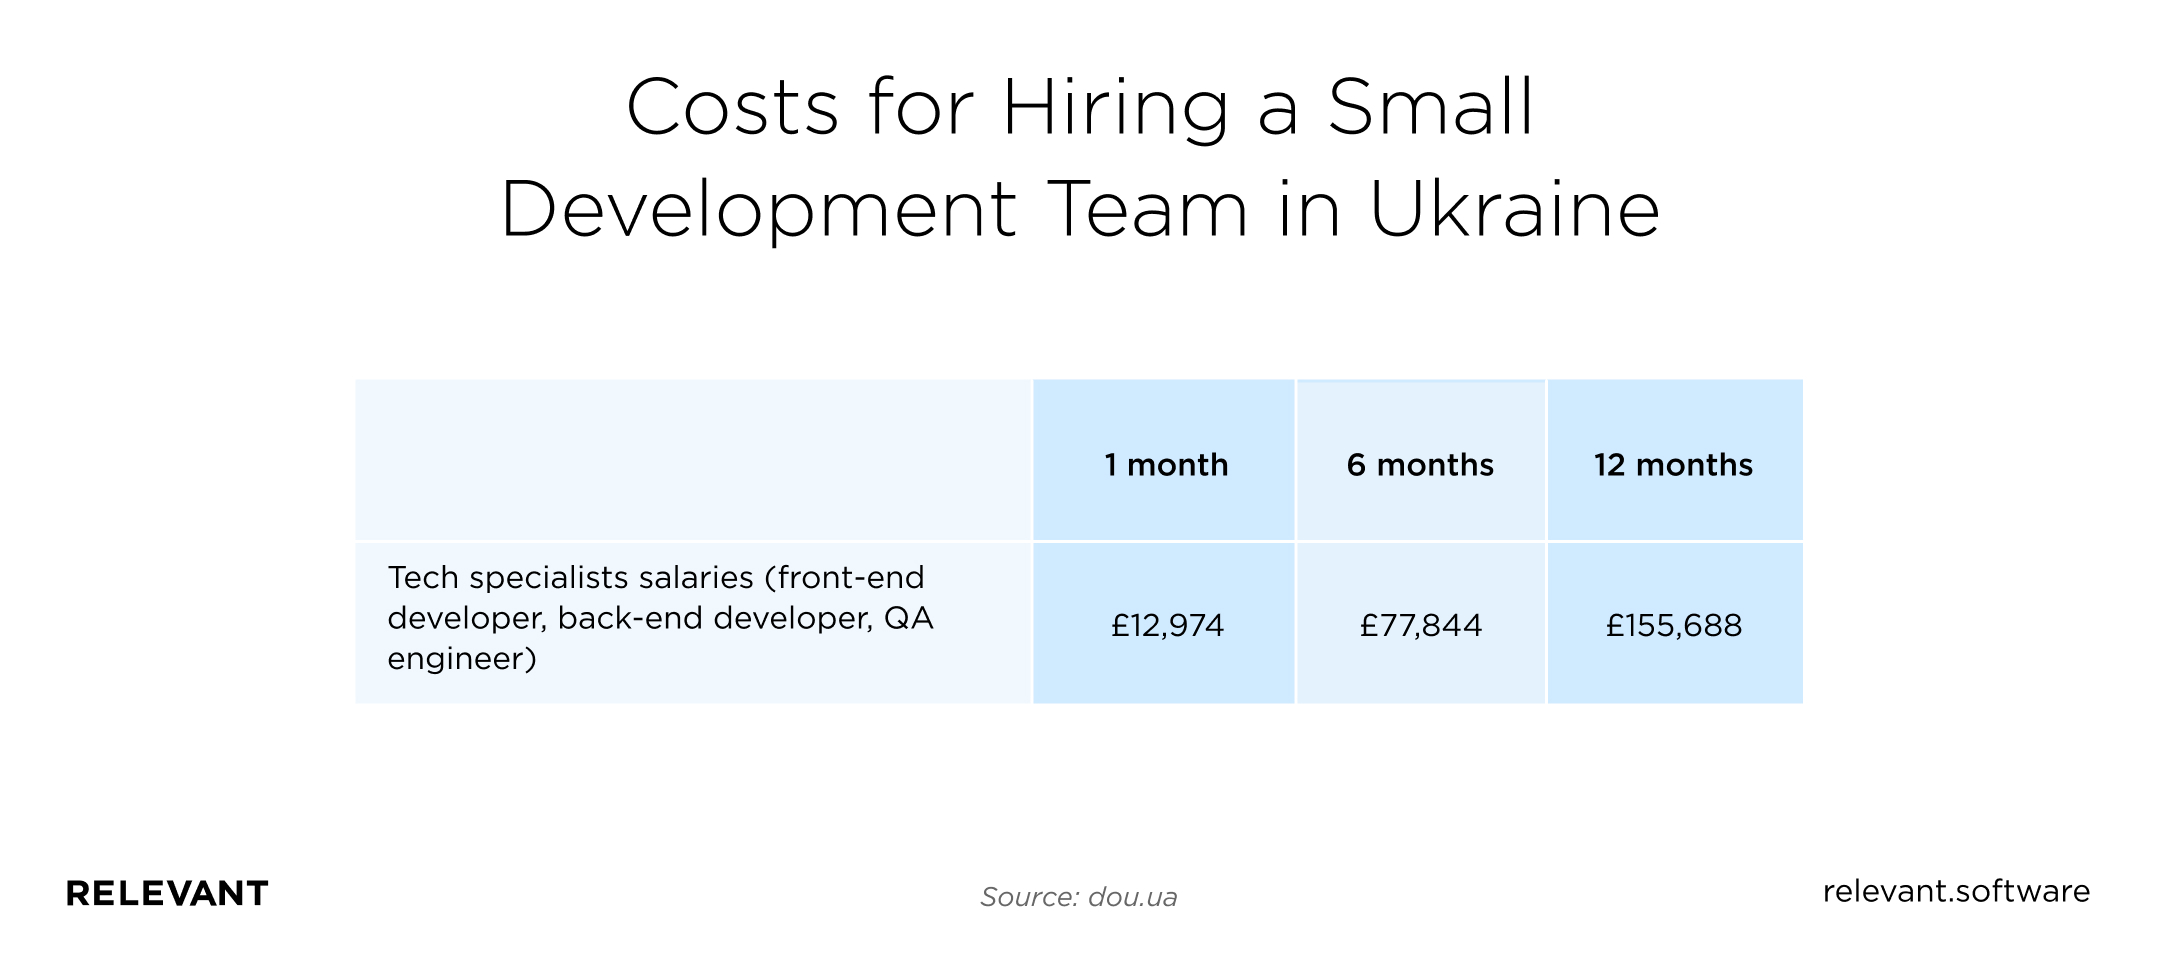 Costs for Hiring a Small Development Team in Ukraine